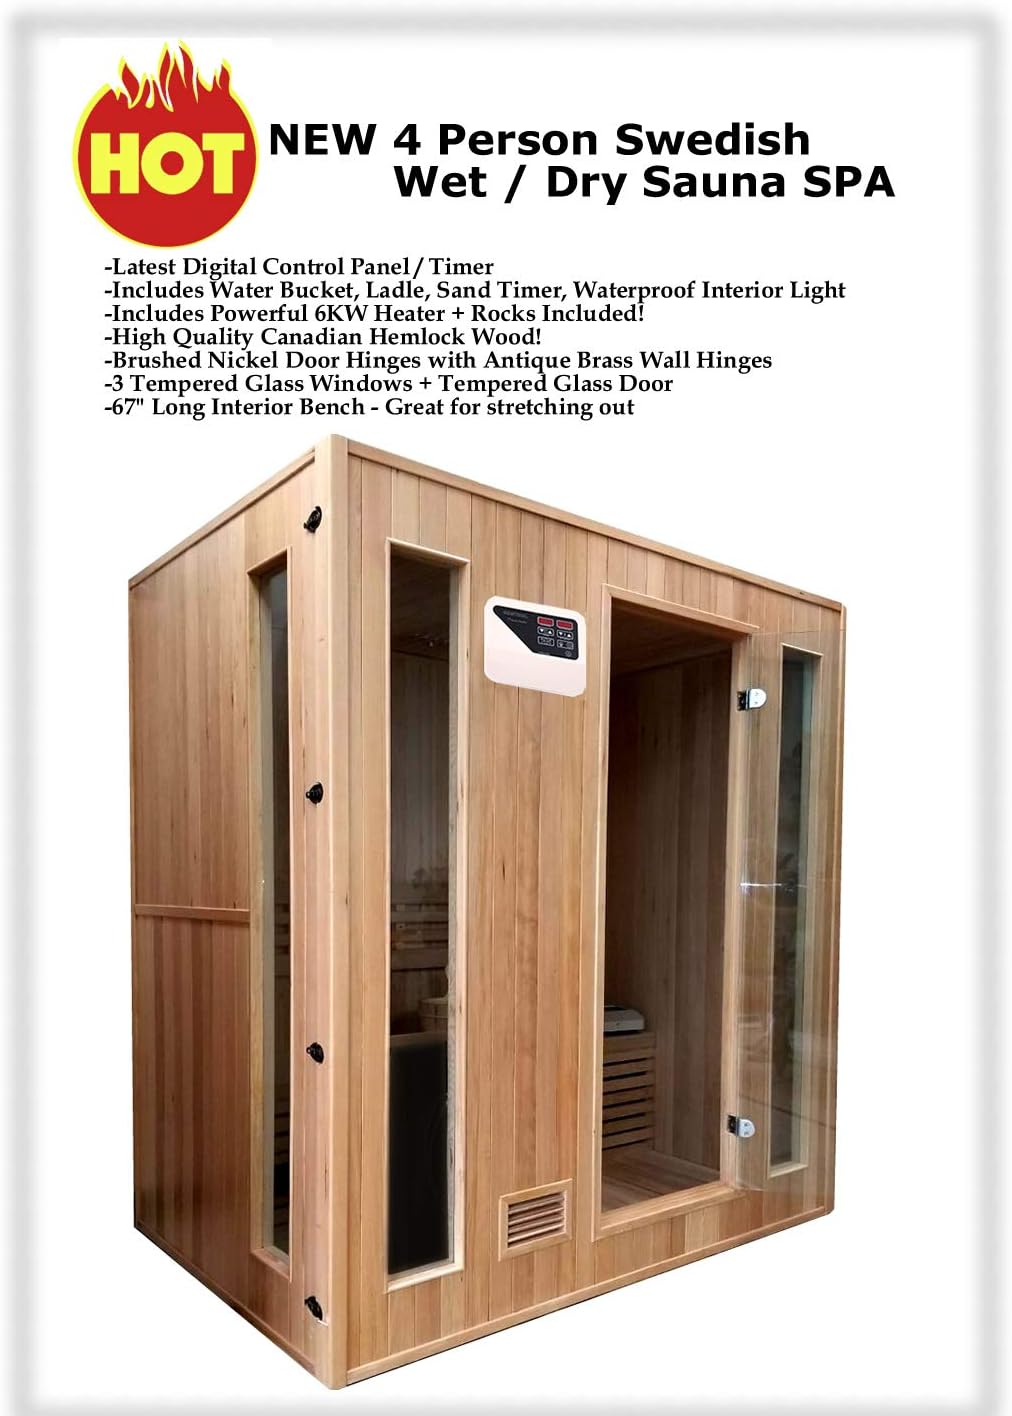 Canadian Hemlock Wood Traditional Swedish 72" 4 Person Indoor Sauna Spa, with 6KW Wet or Dry Heater, Rocks, and Water Bucket